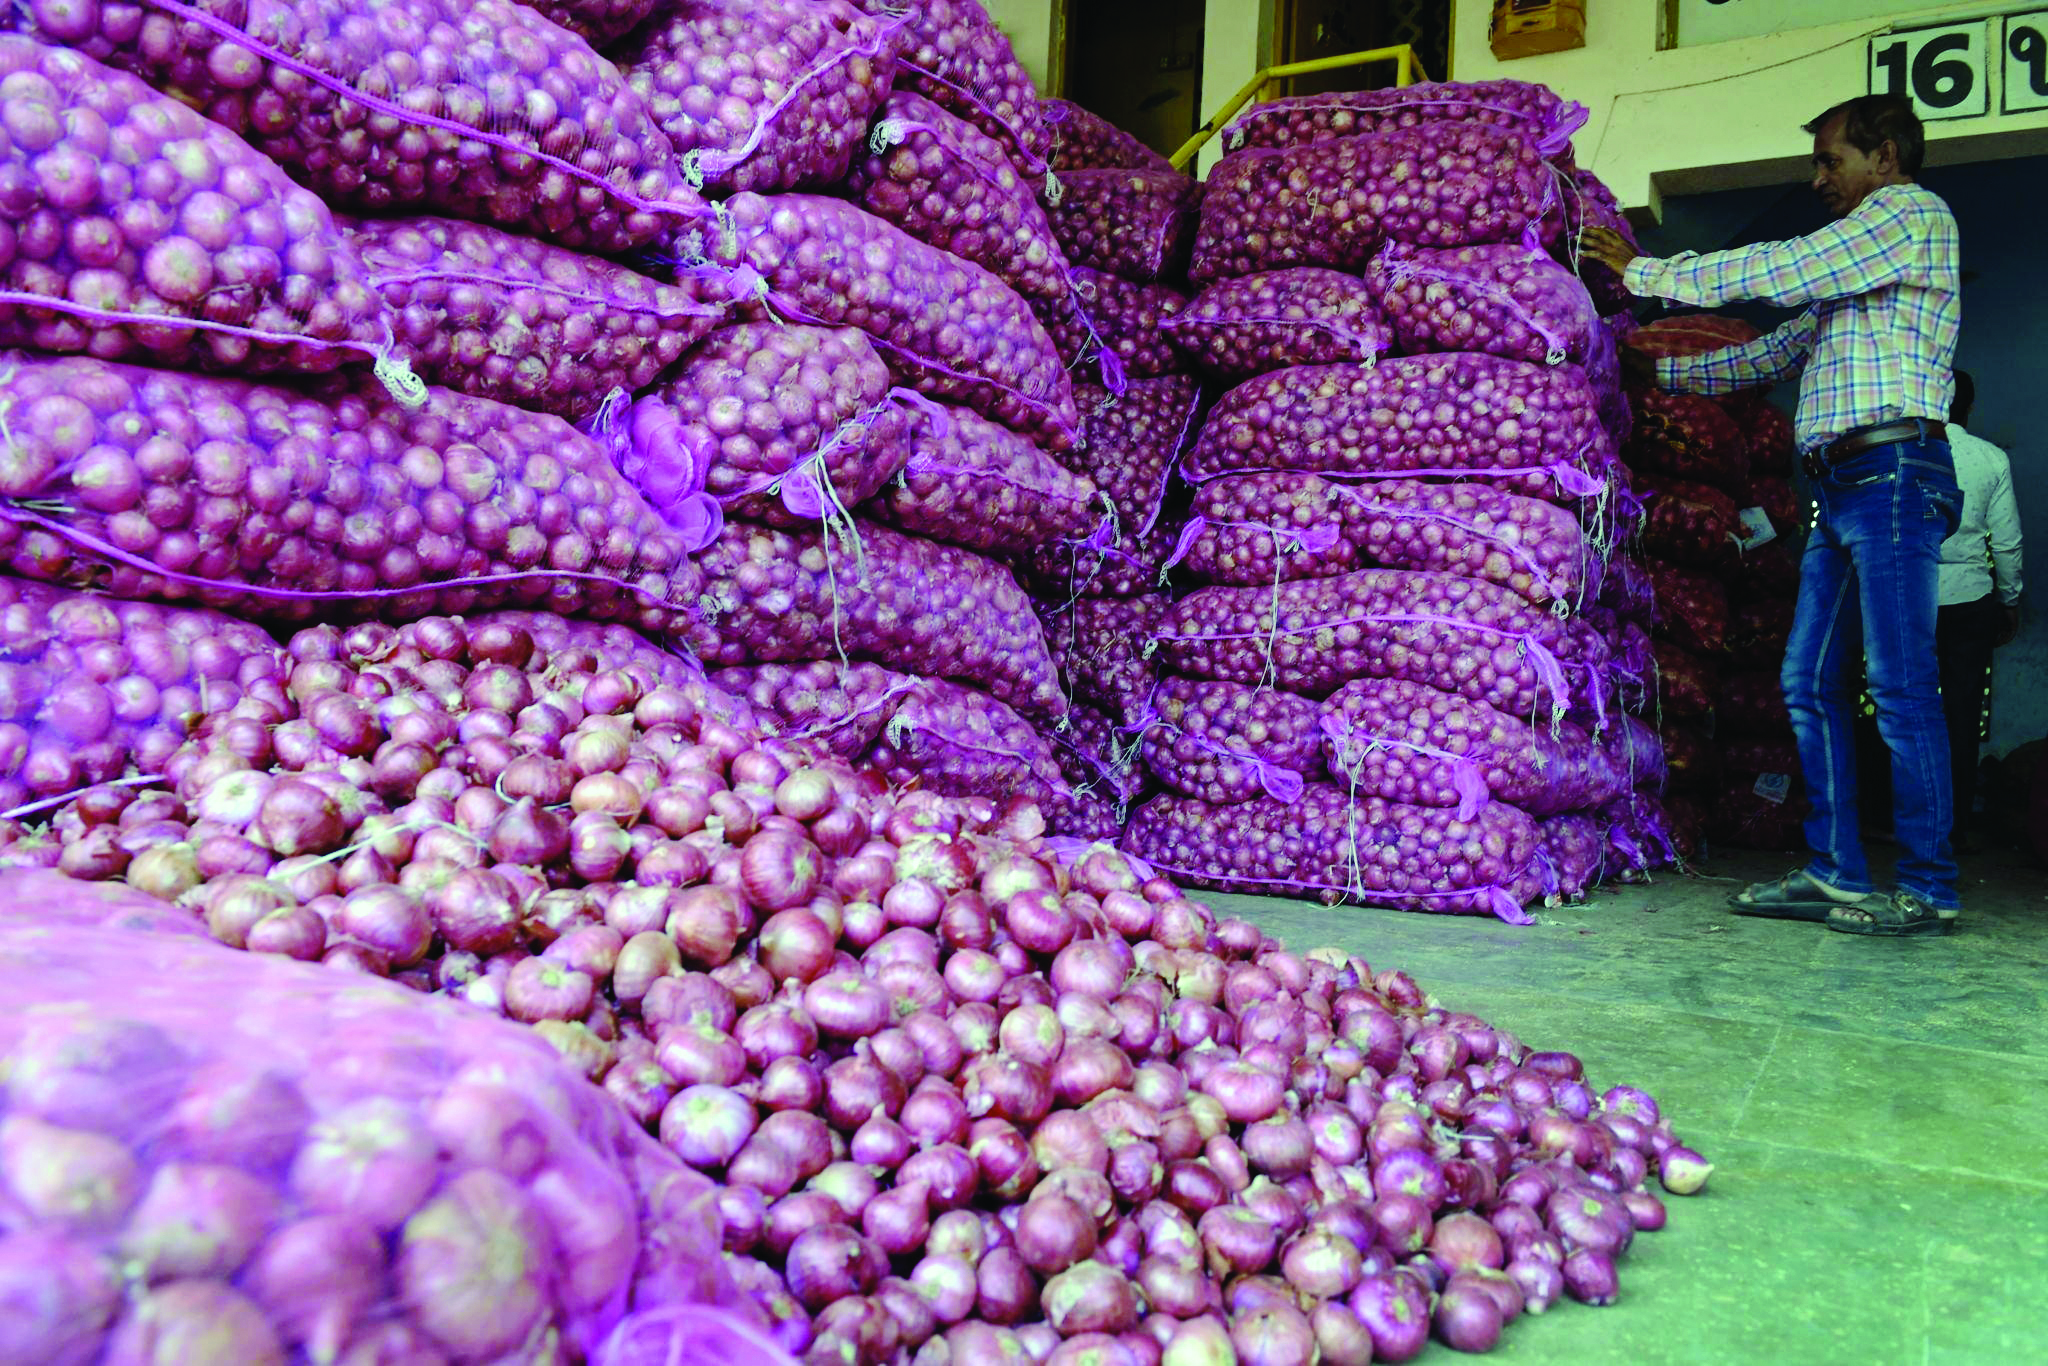 EC nod taken before lifting ban on onion exports: Govt sources